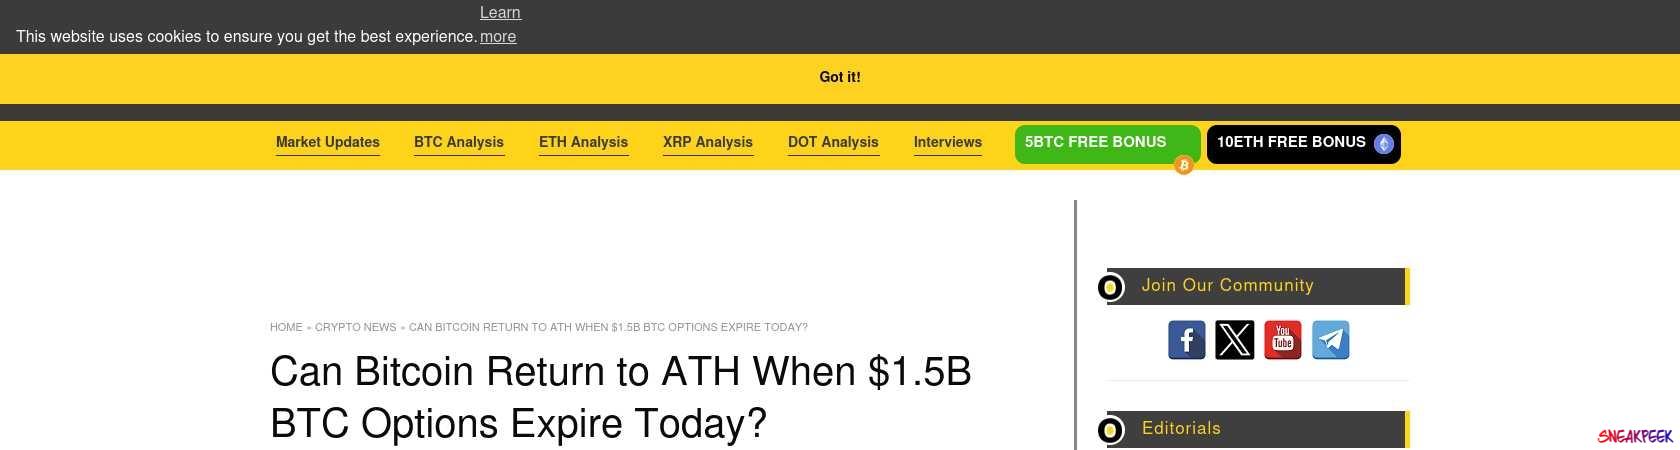 Read the full Article:  ⭲ Can Bitcoin Return to ATH When $1.5B BTC Options Expire Today? 